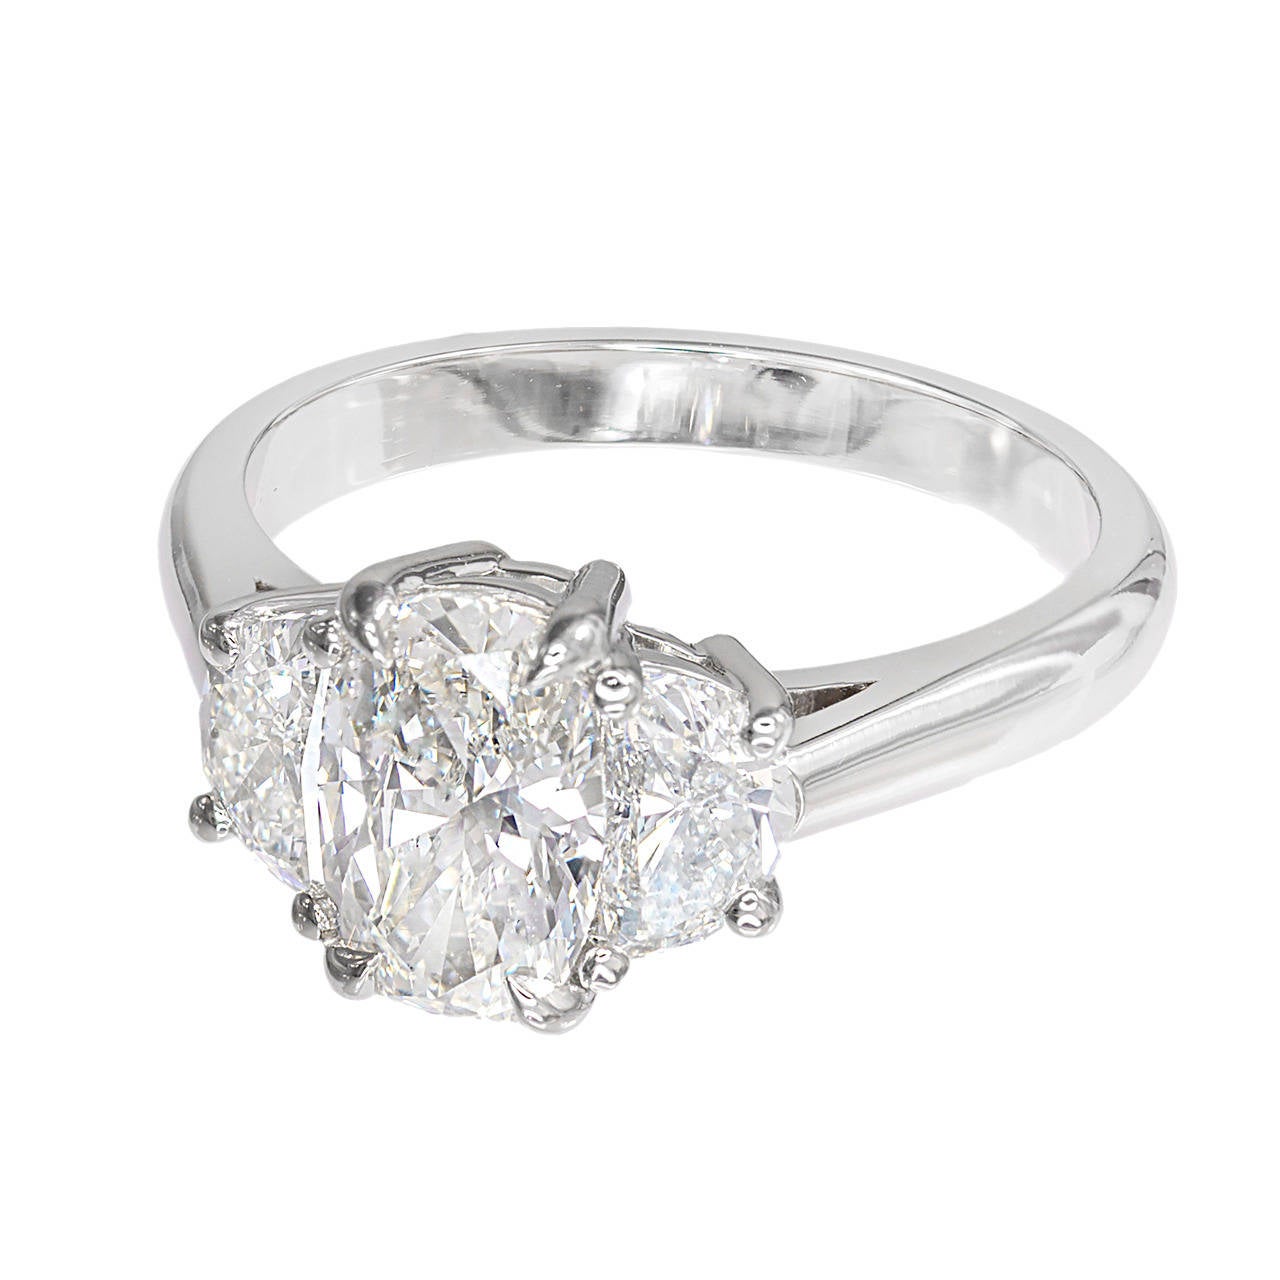 Bright sparkly elongated antique cushion cut diamond 1.09ct three-stone engagement ring.  The diamond is circa 1920-1930 and is matched with half-moon cut diamonds of the same quality from the same era. Setting was designed in the Peter Suchy